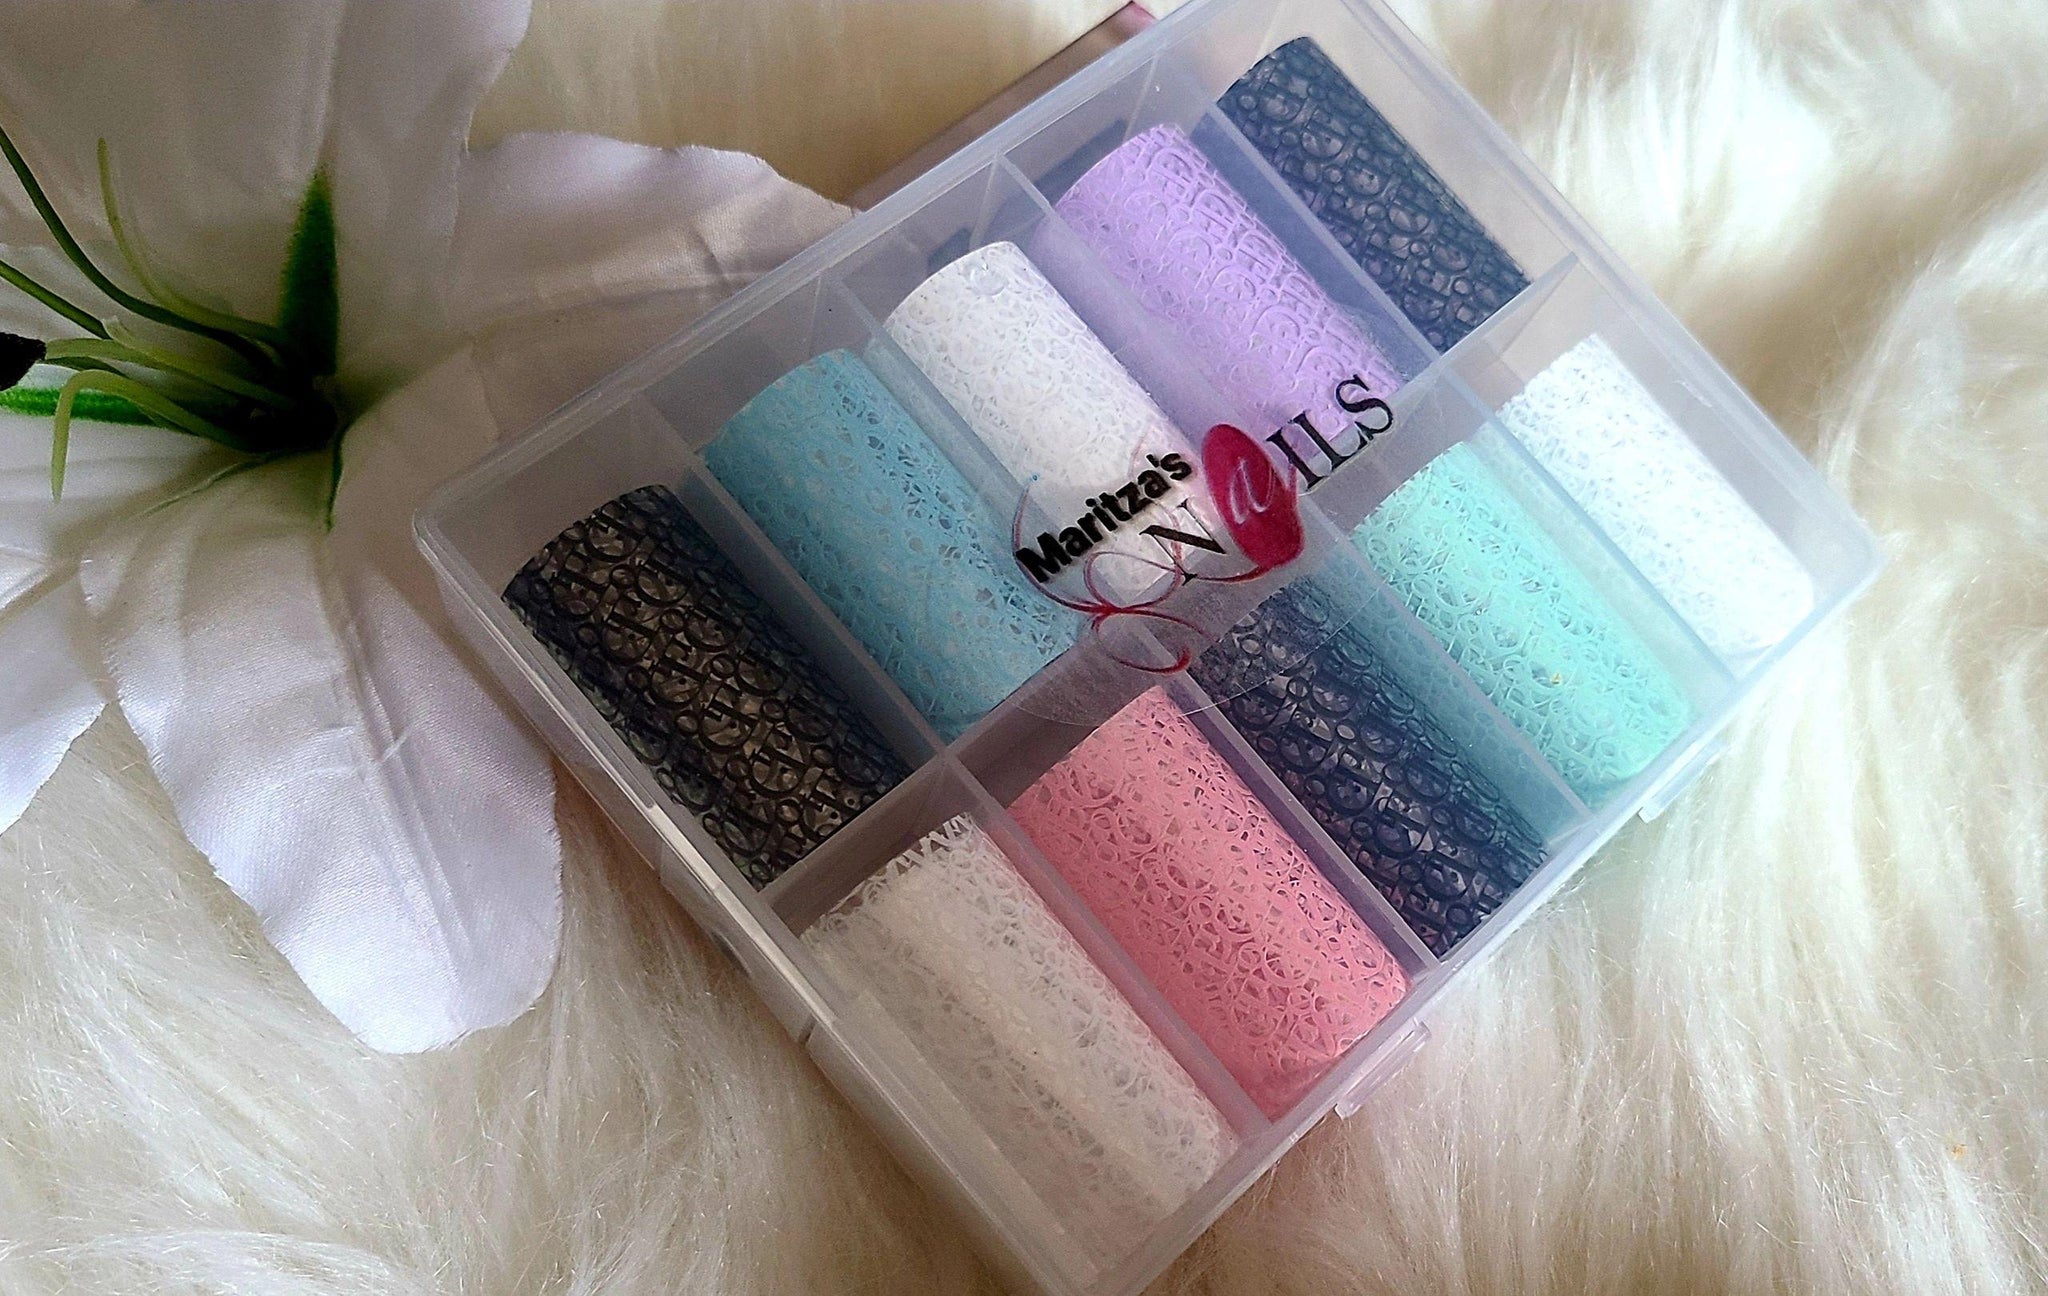 Dior Nail Foil - Item That You Desired - AliExpress